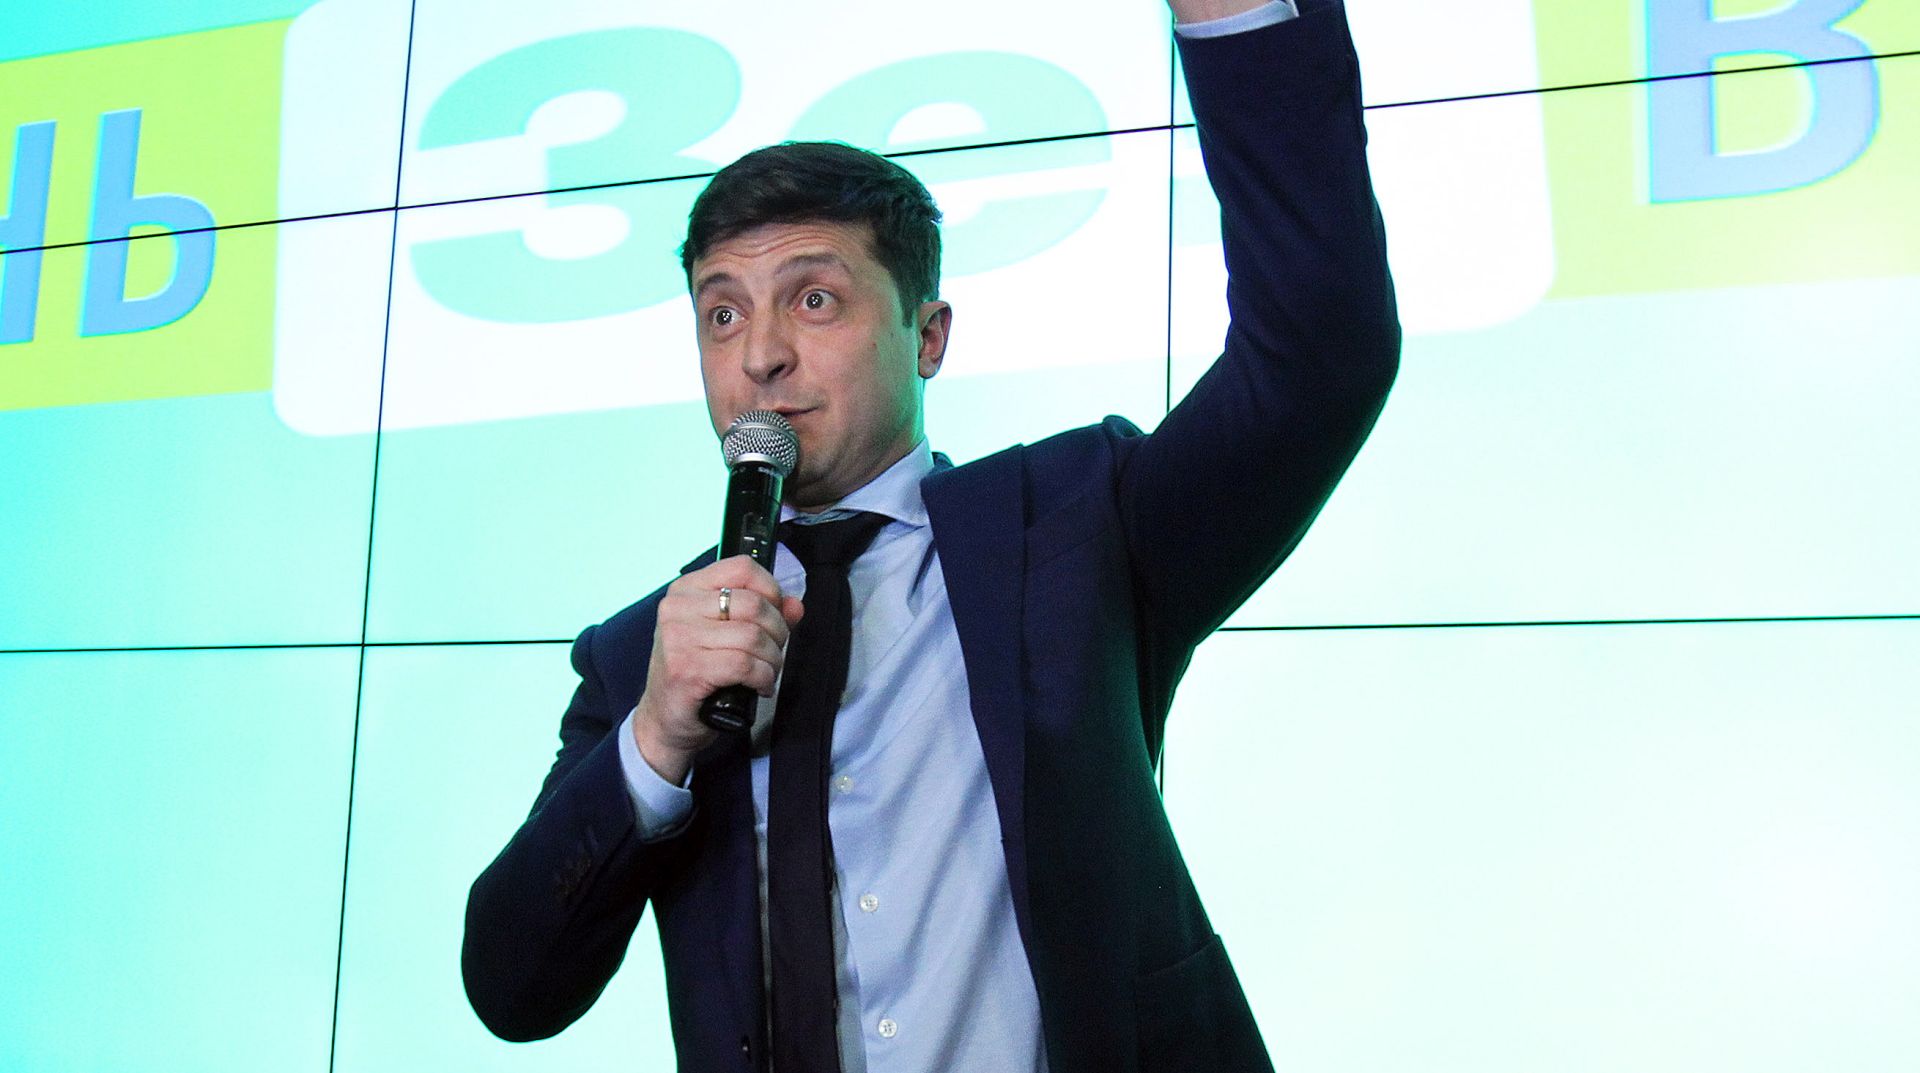 epa07477157 Ukrainian showman and comedian, and Presidential candidate Volodymyr Zelenskiy speaks at his headquarters following a presidential elections in Kiev, Ukraine, 31 March 2019. According to initial exit polls, Volodymyr Zelensky won the first round of the Ukraine presidential election with 30.4 percent of votes. Ukrainian President Petro Poroshenko is second with 17.8 percent of votes. If no candidate will receive more than half of the votes, the run-off elections will be held on 21 April 2019.  EPA/STEPAN FRANKO